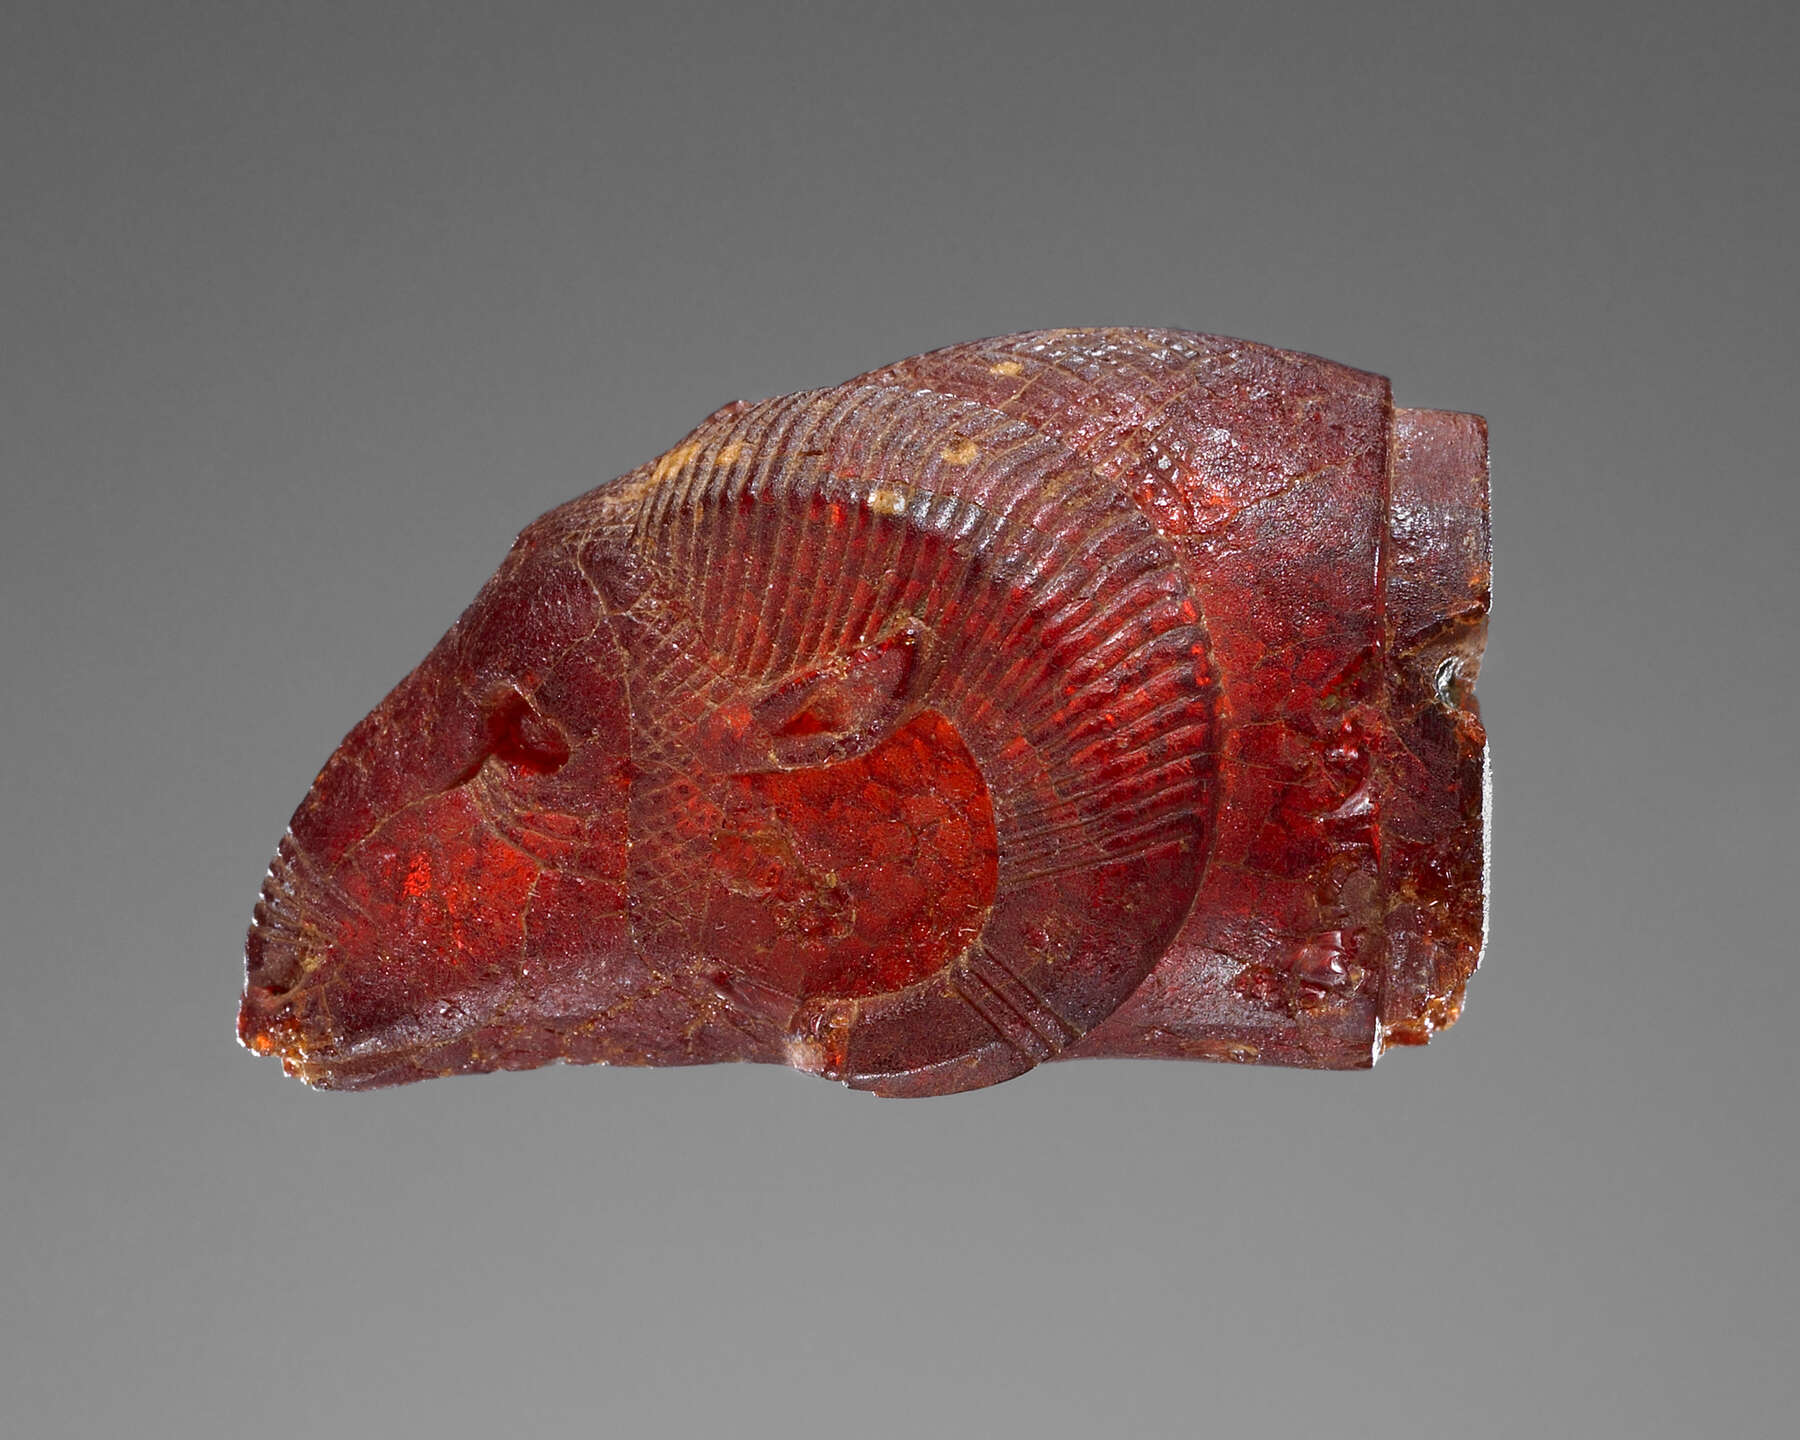 Rams' Heads | Ancient Carved Ambers in the J. Paul Getty Museum